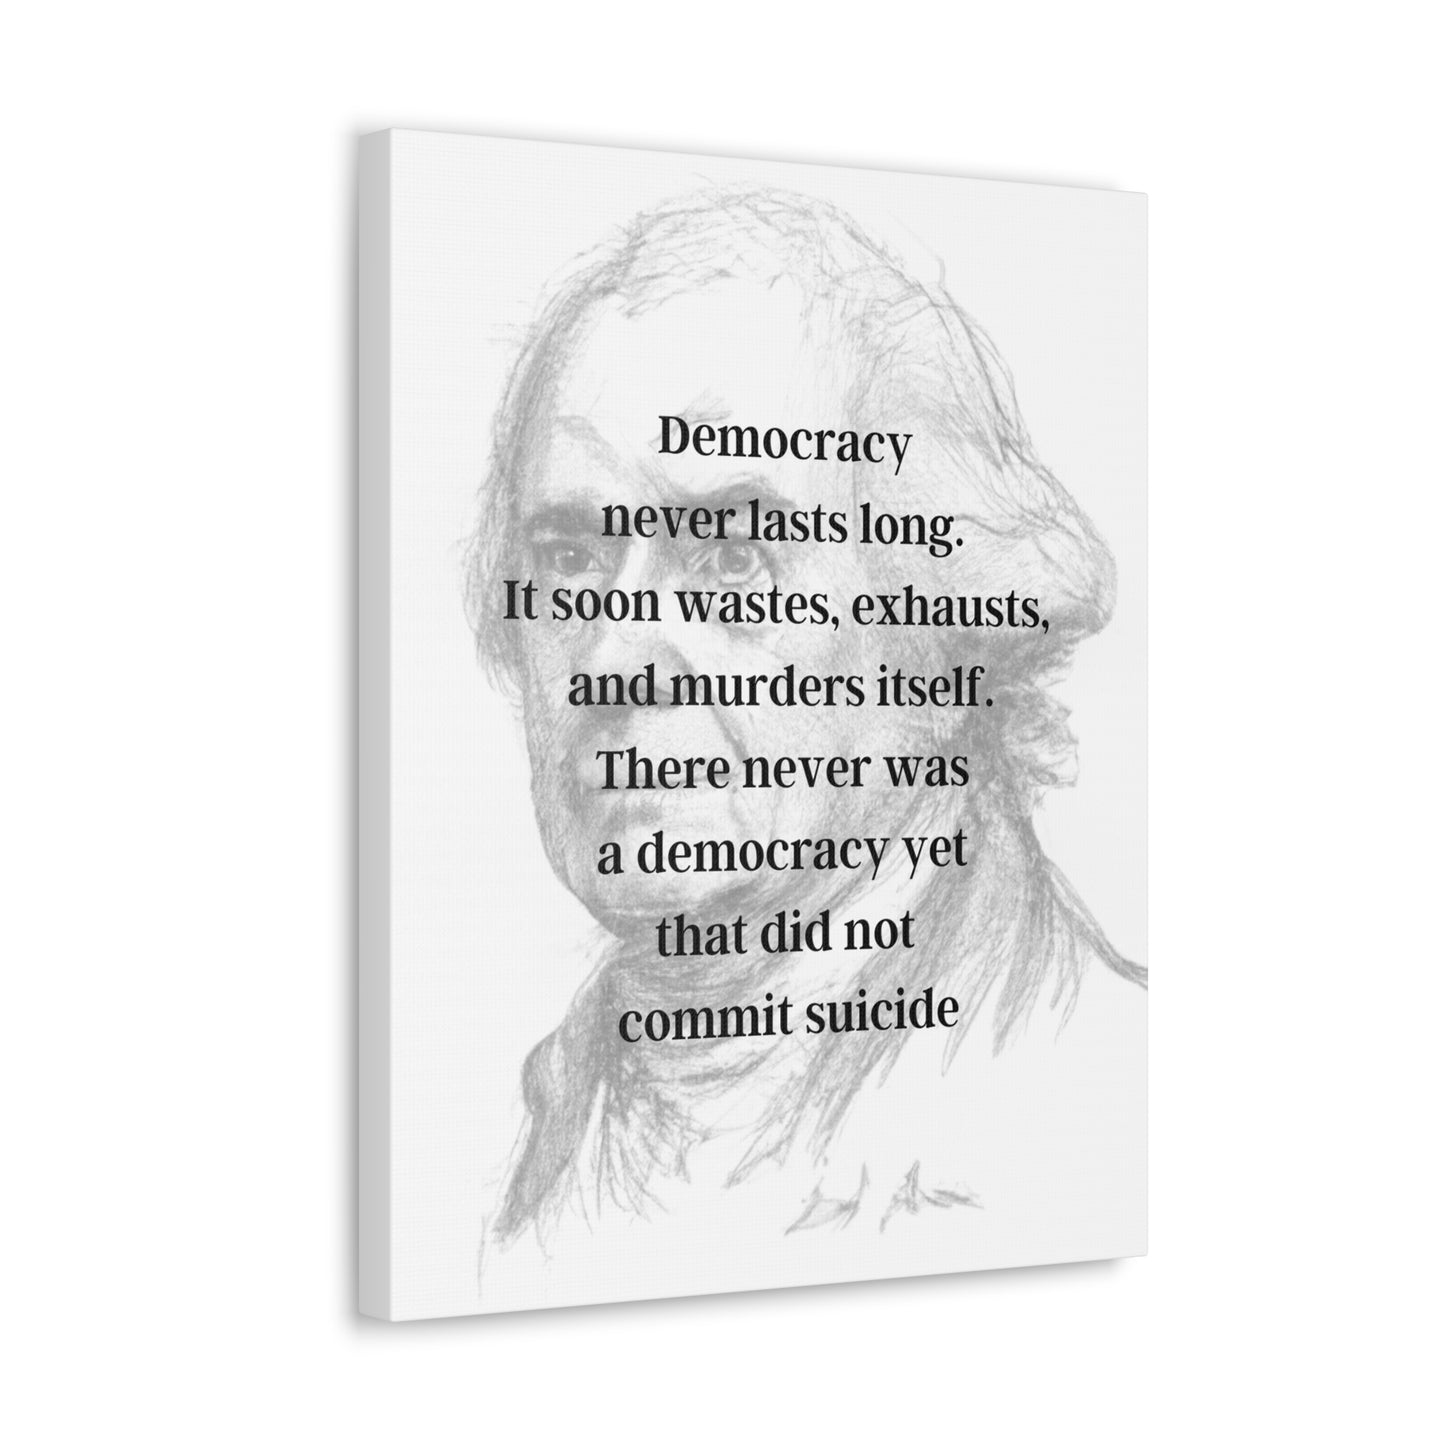 John Adams Quote 2, Canvas Art, Light Print, 2nd President of the United States, American Patriots, AI Art, Political Art, Canvas Prints, Presidential Portraits, Presidential Quotes, Inspirational Quotes